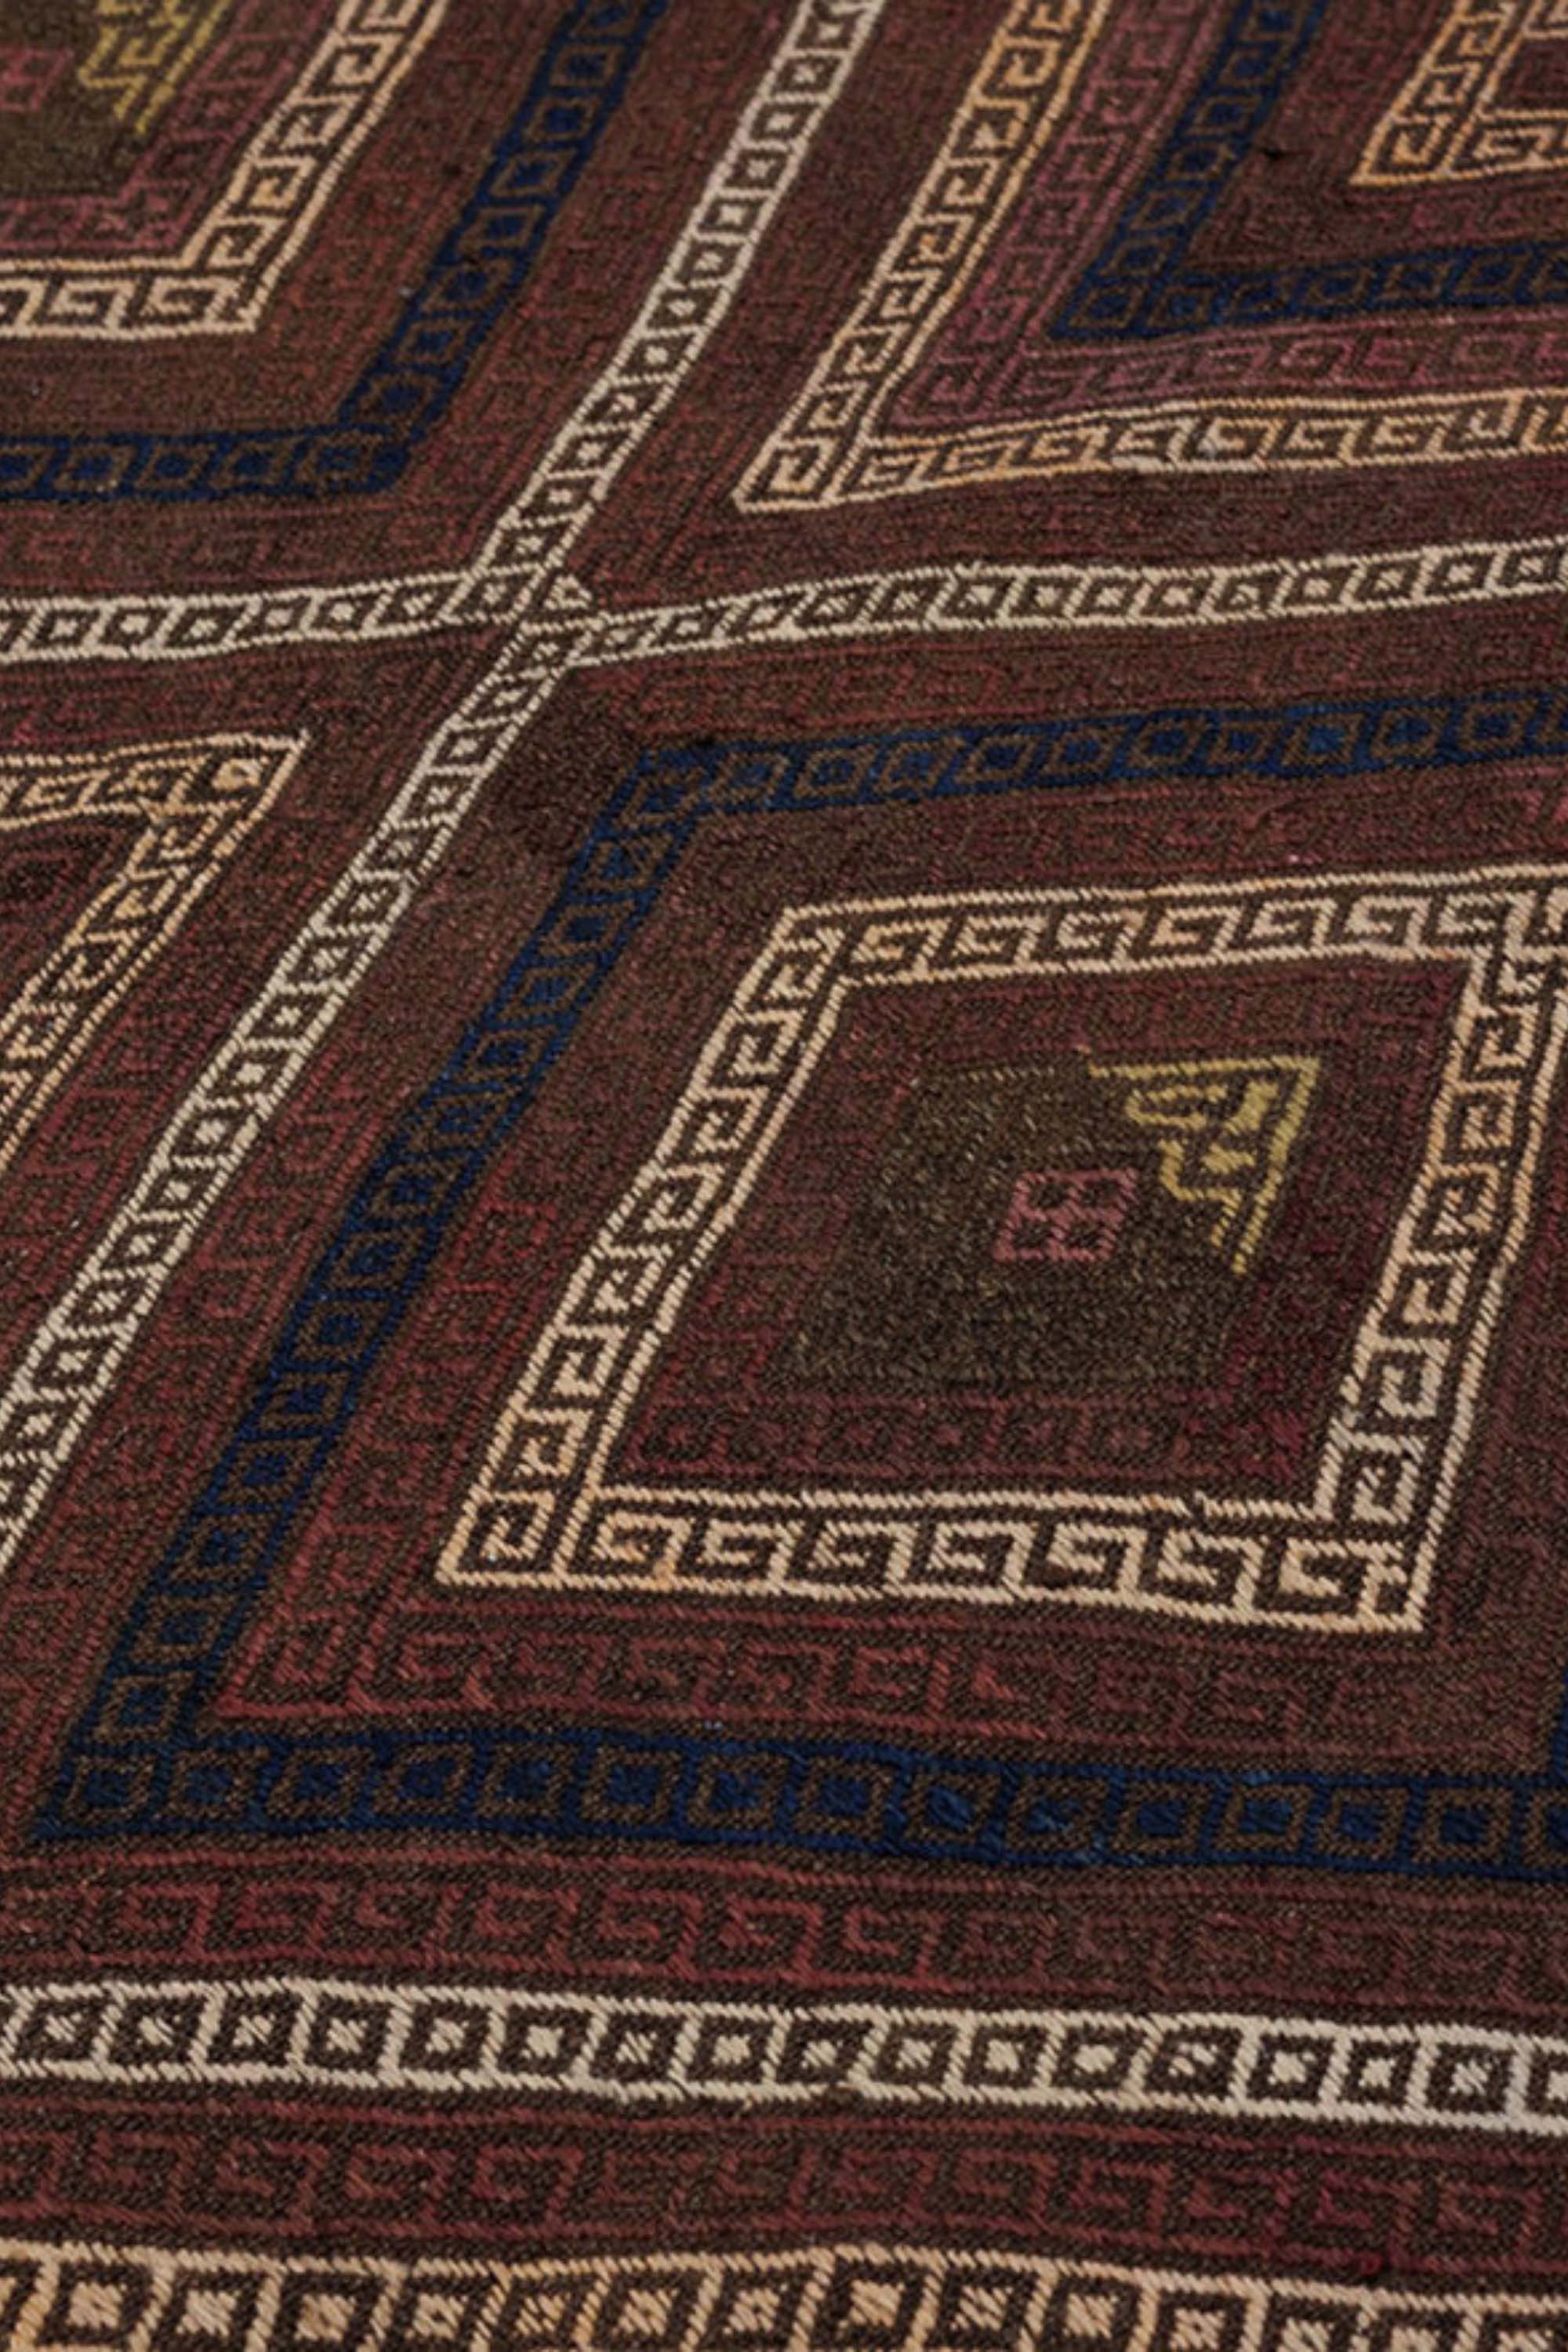 Brown, black, and red traditional Afghan rug